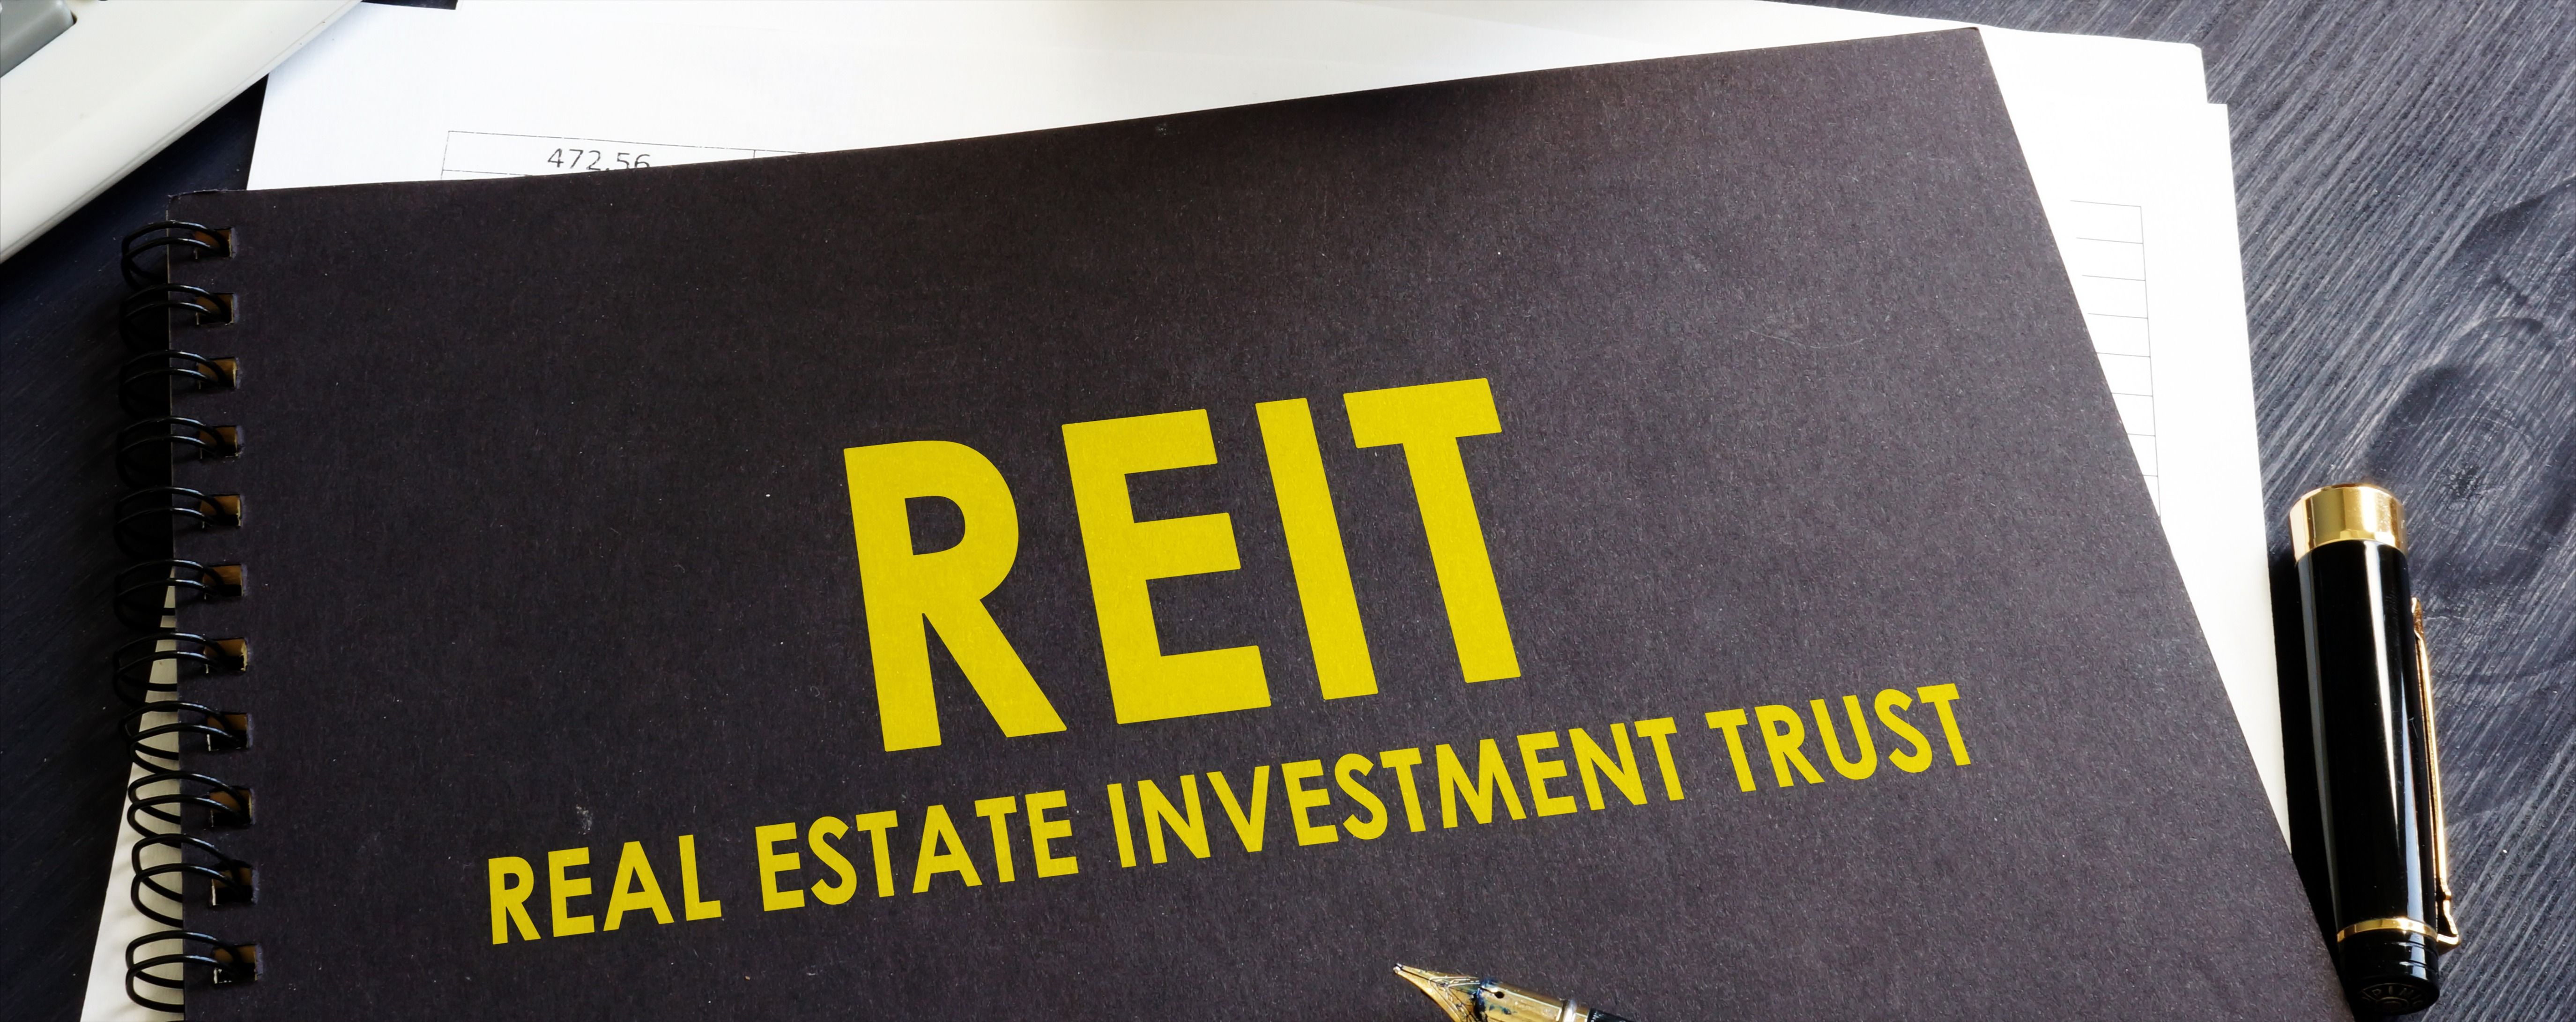 Real estate investment trust REIT on an office desk